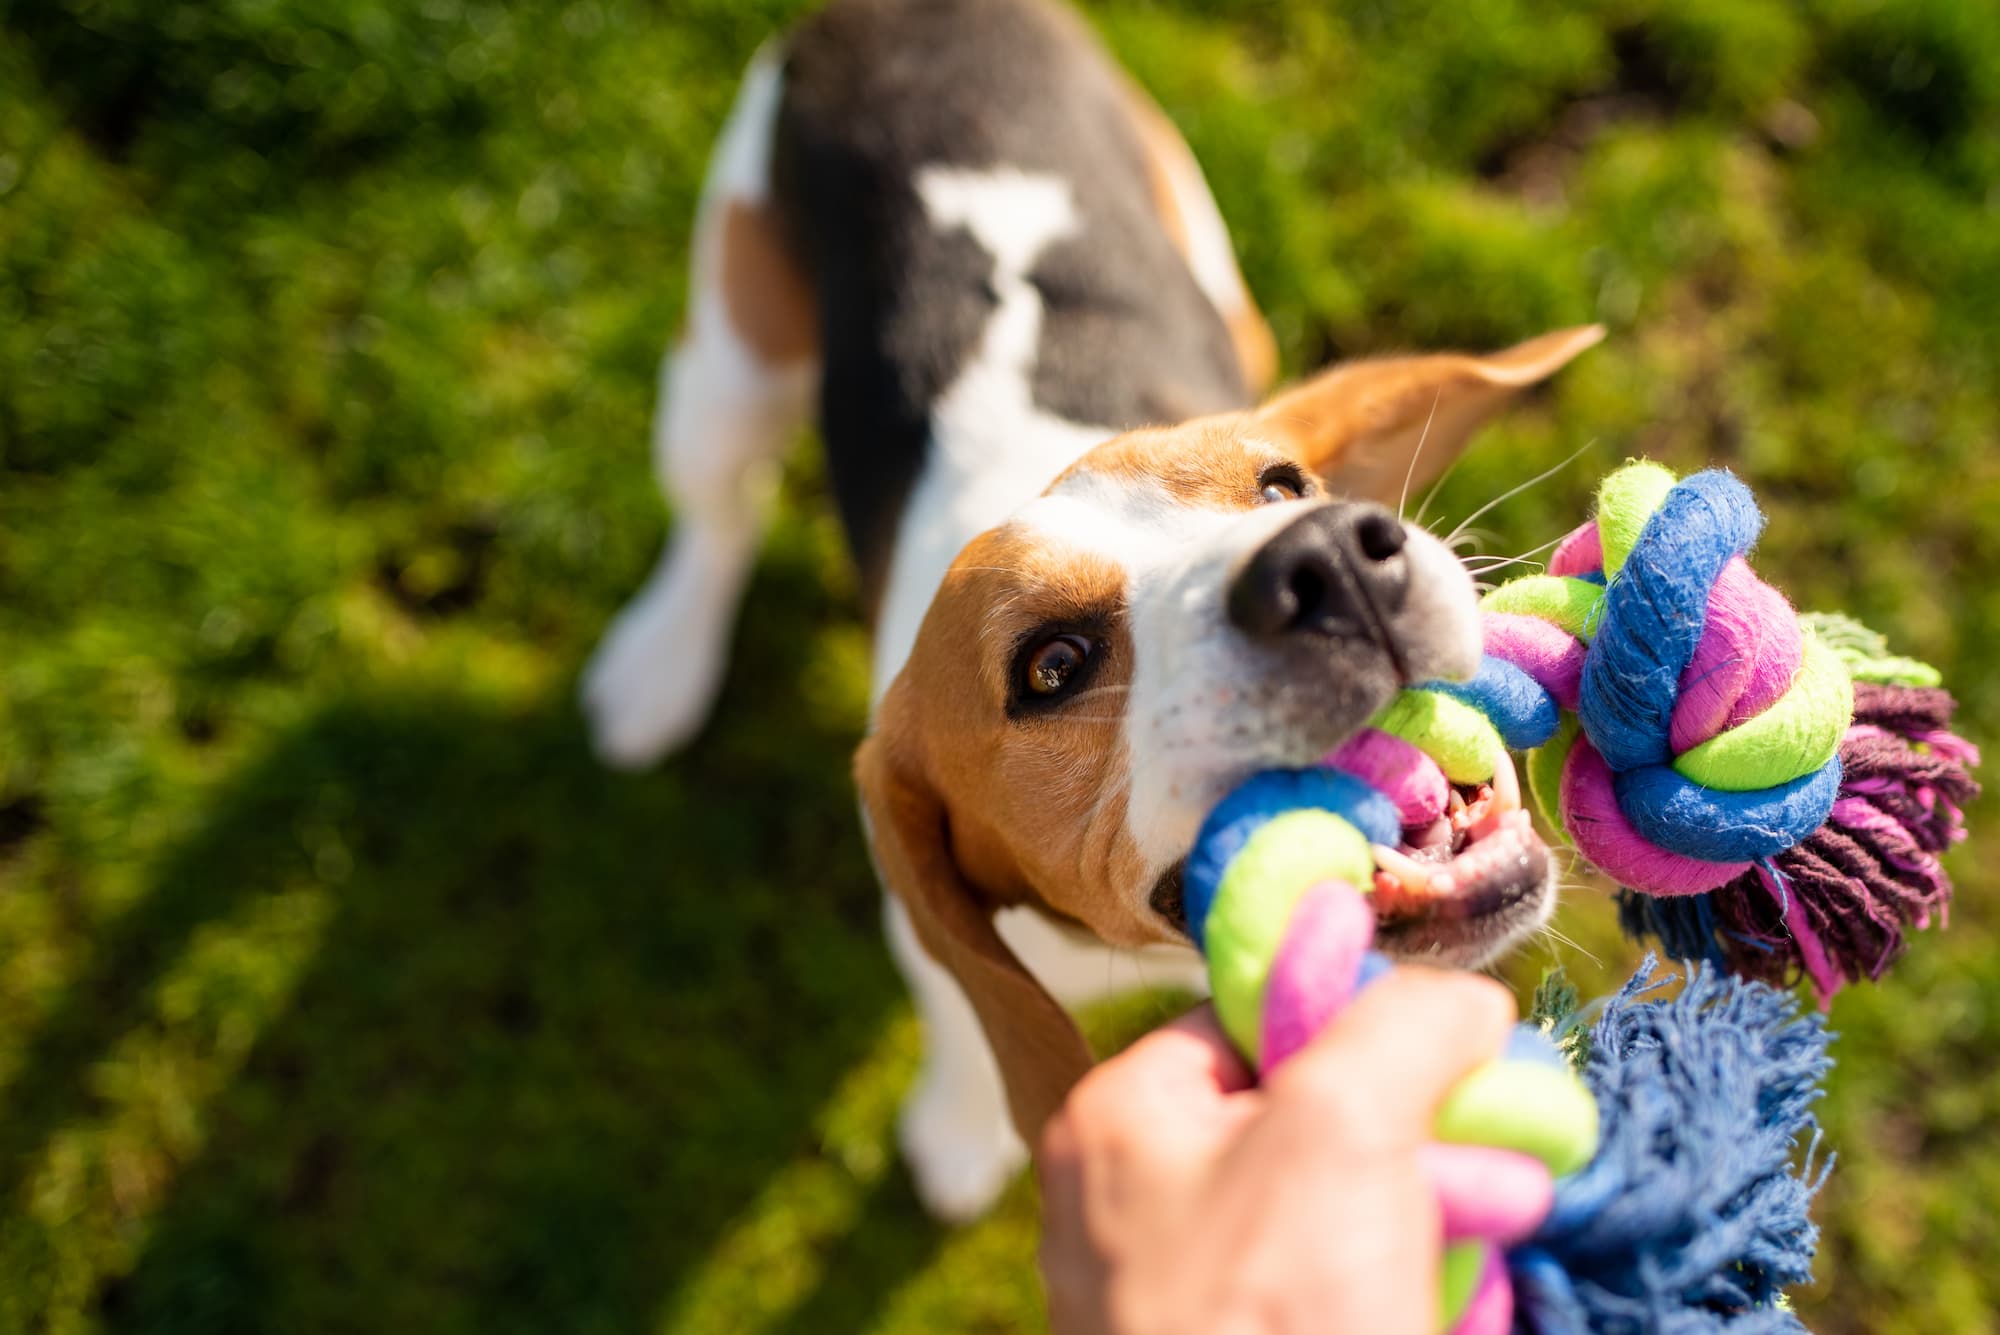 Enrichment toys for dogs – What are they & why are they important?